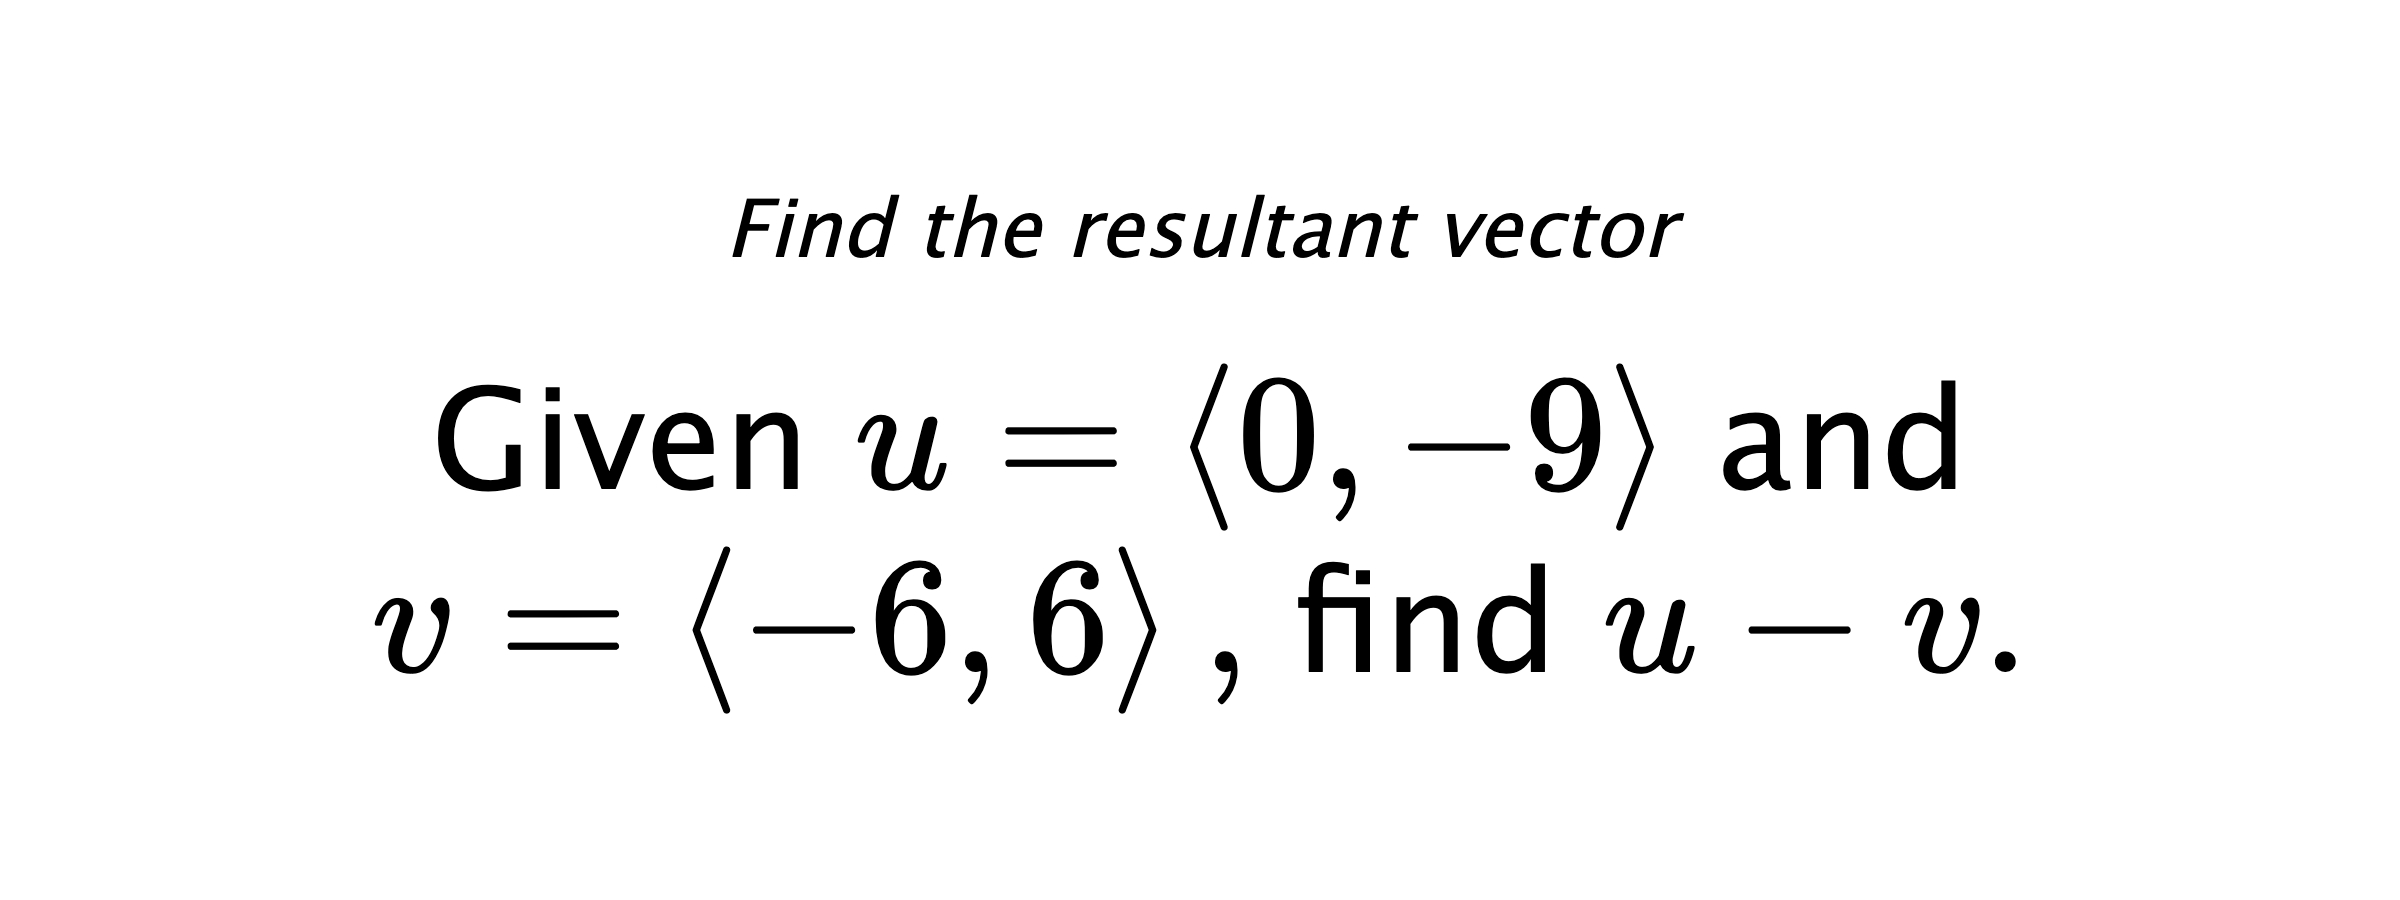 Find the resultant vector Given $ u = \left< 0,-9 \right> $ and $ v = \left< -6,6 \right> ,$ find $ u-v .$